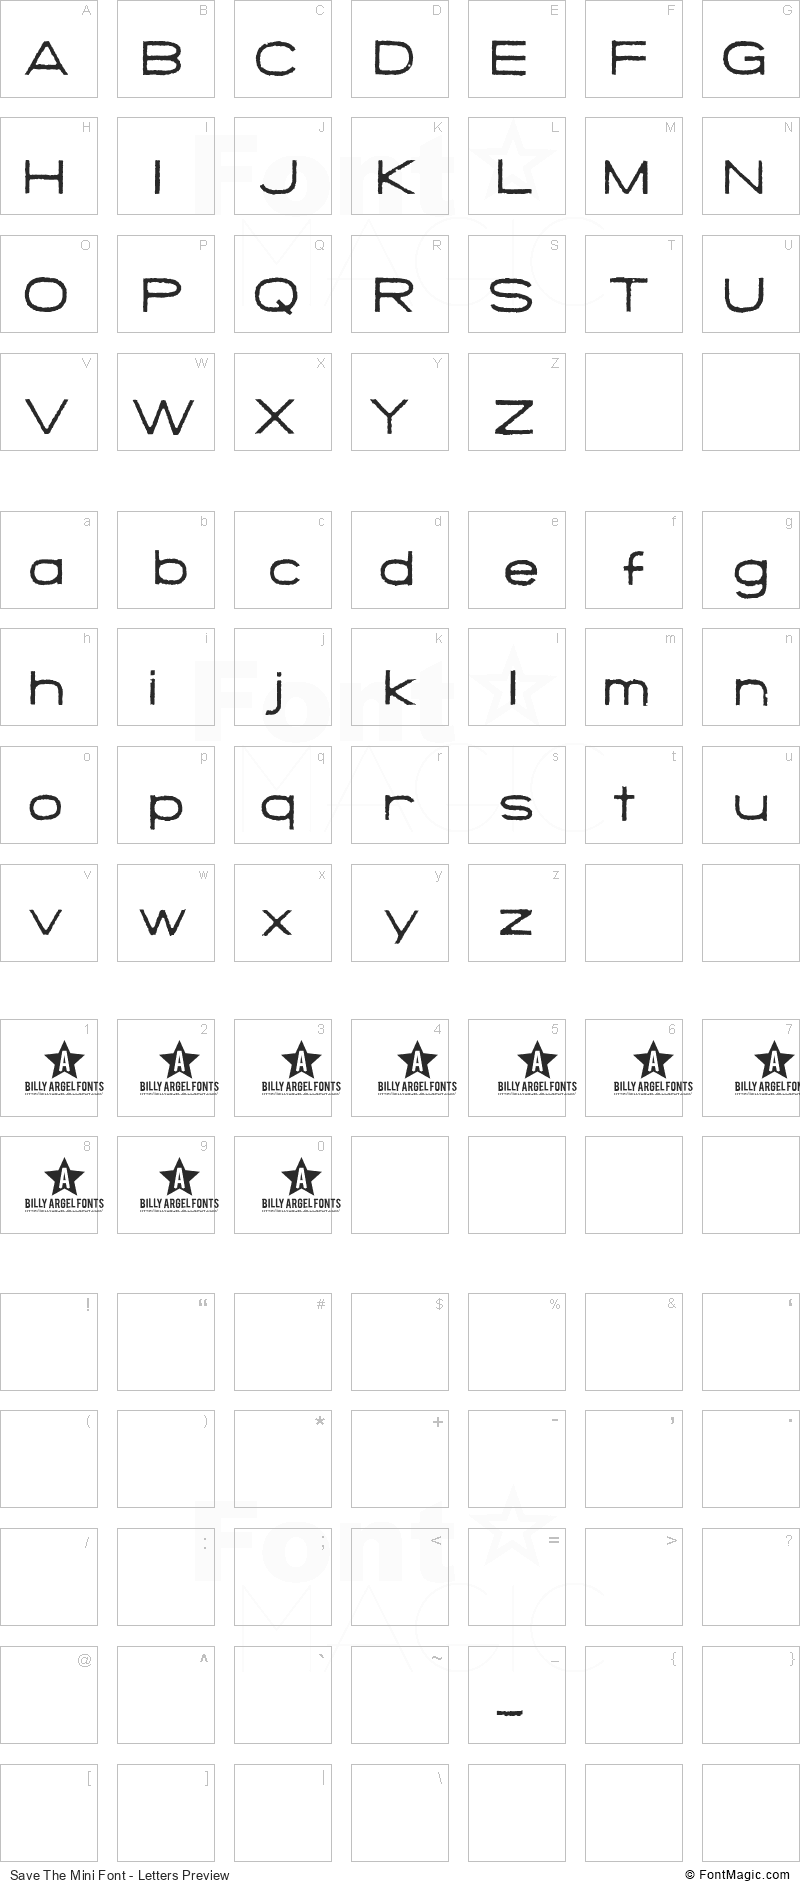 Save The Mini Font - All Latters Preview Chart